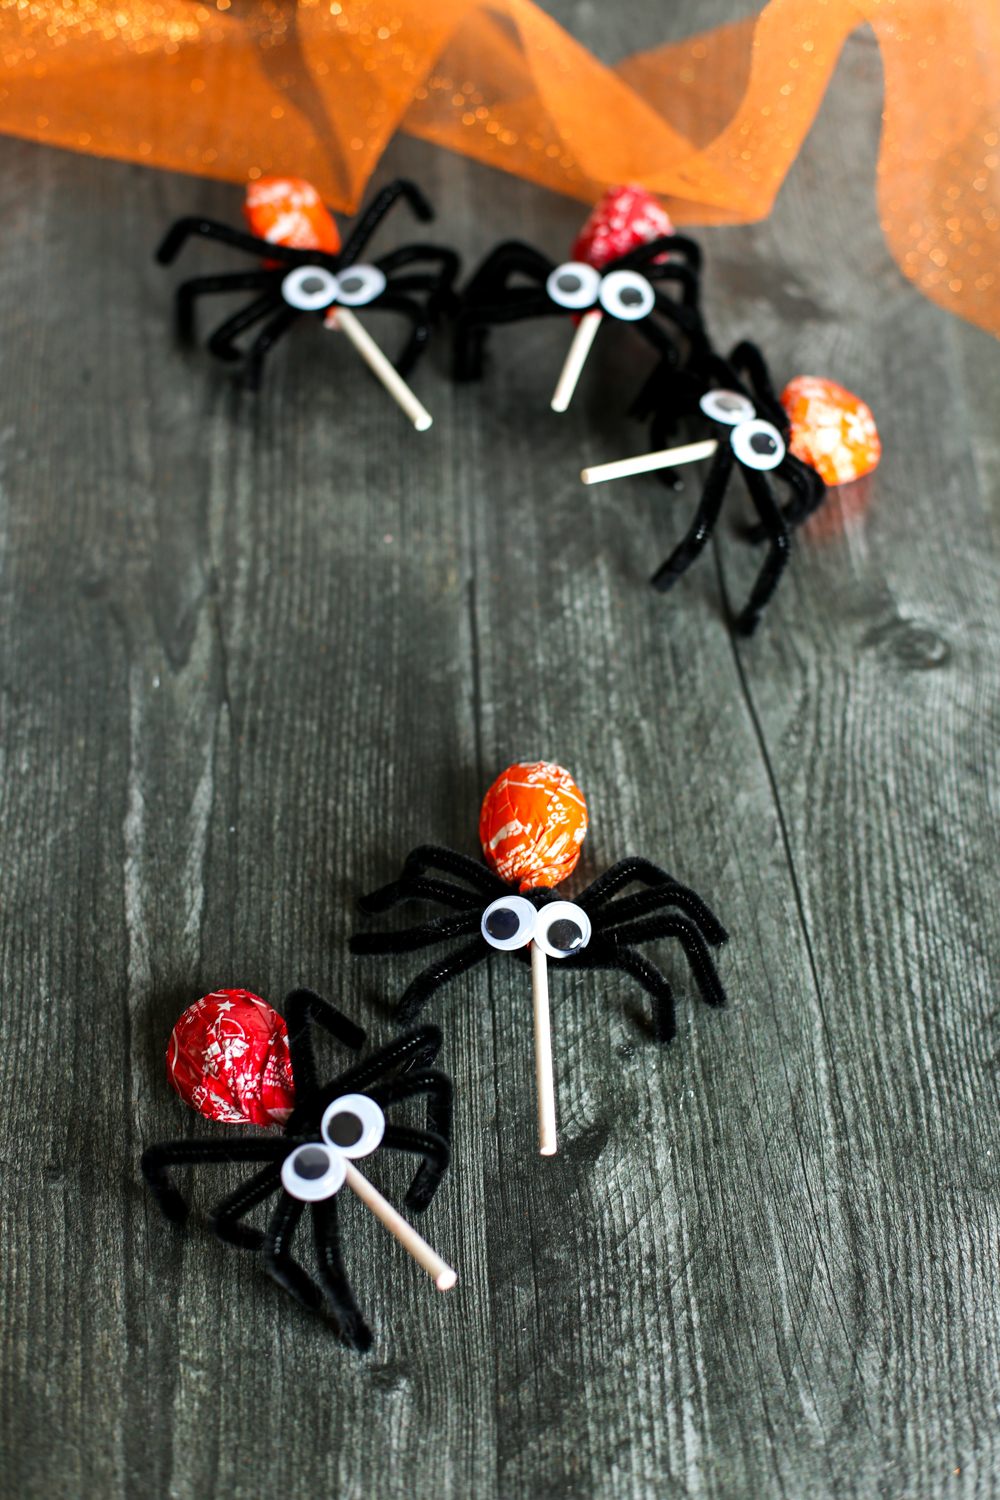 Two spider lollipops on a wooden table.